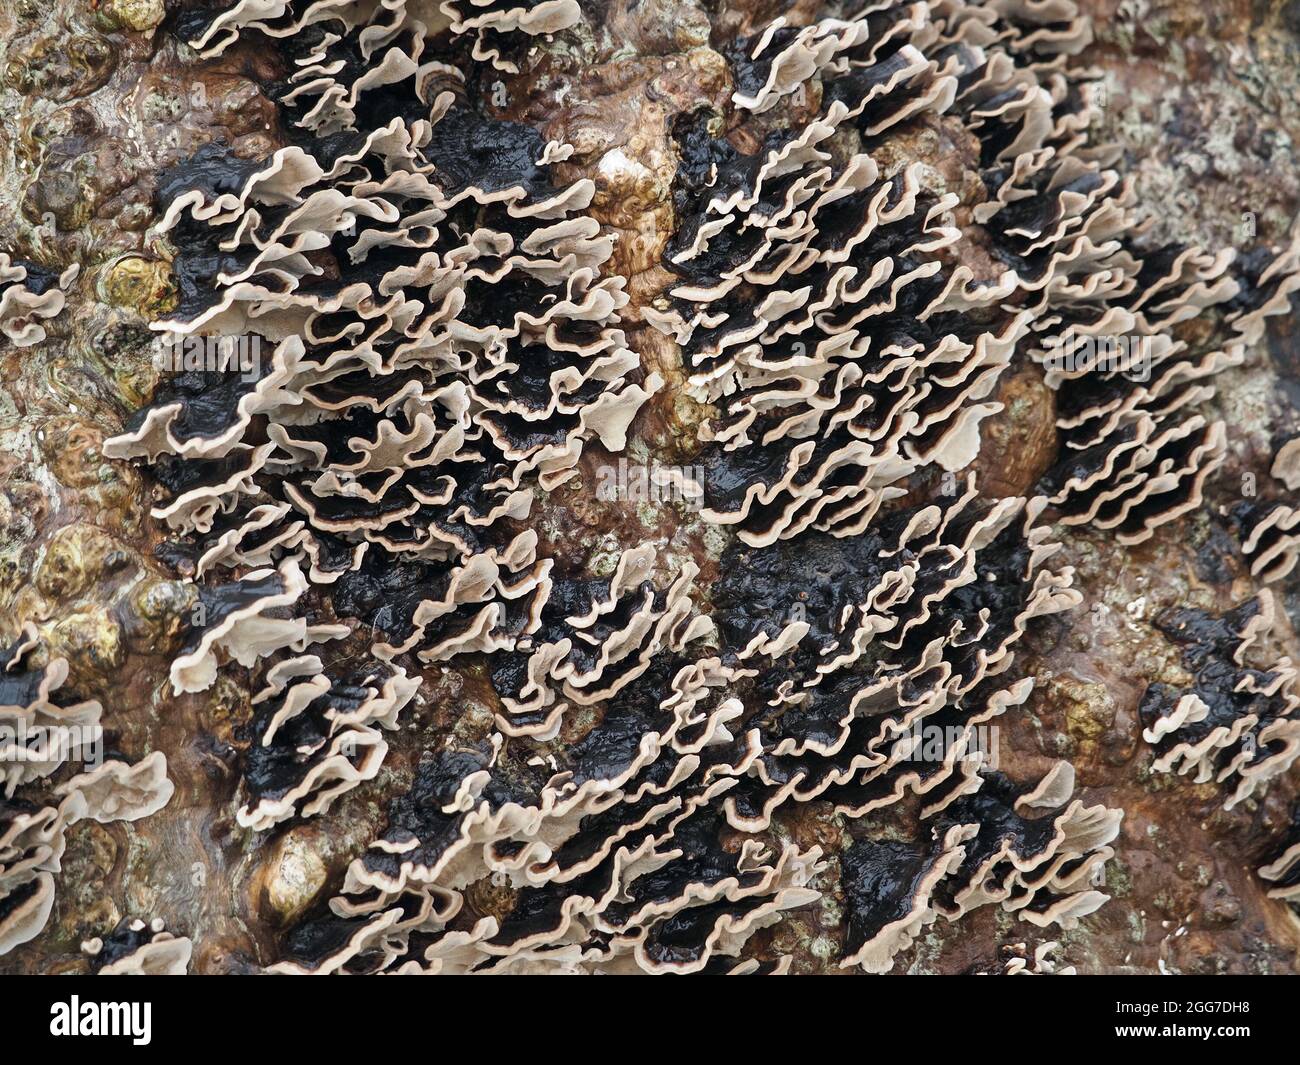 frilly wood-rotting (xylophagous) fungus with black upper surface of fruiting bodies & creamy white below on dead ash tree trunk - Cumbria, England,UK Stock Photo